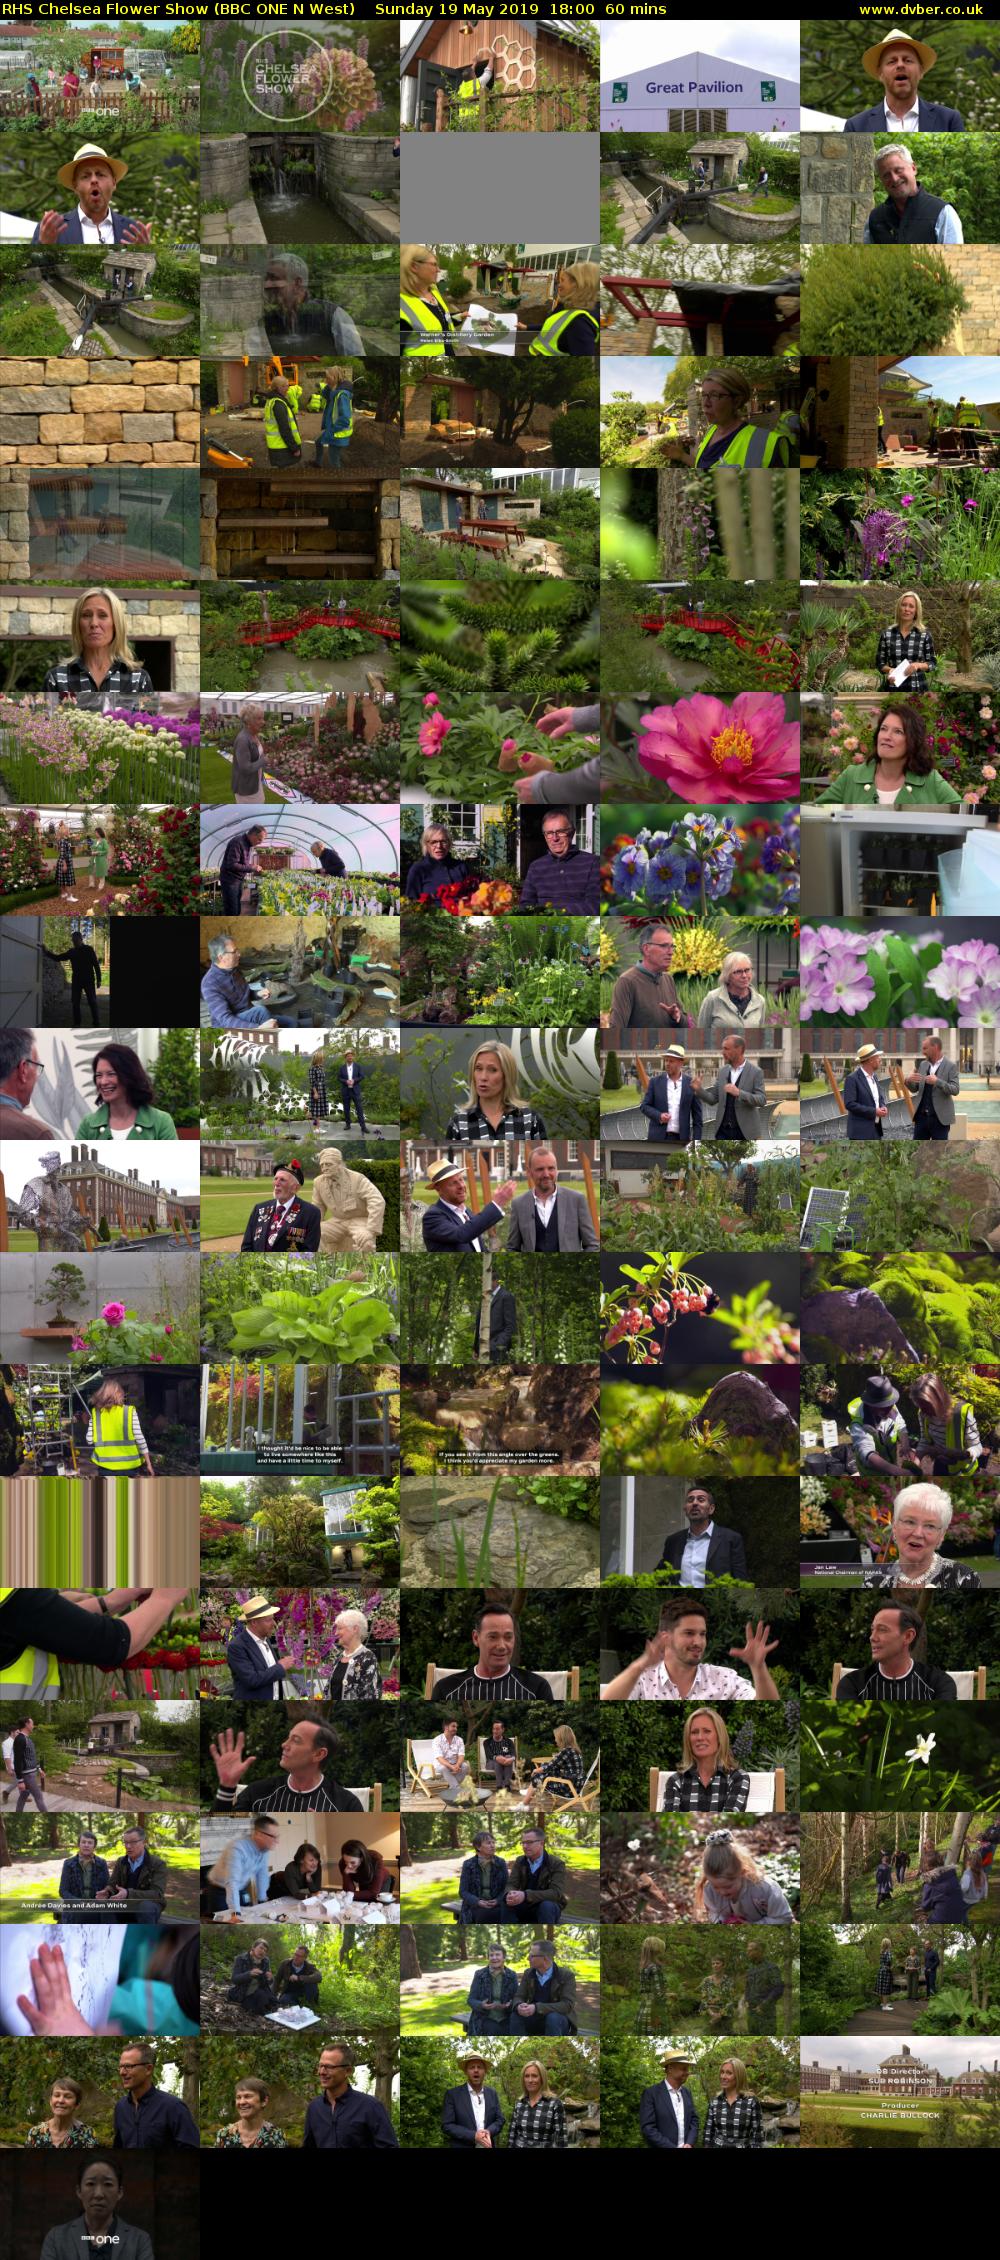 RHS Chelsea Flower Show (BBC ONE N West) Sunday 19 May 2019 18:00 - 19:00